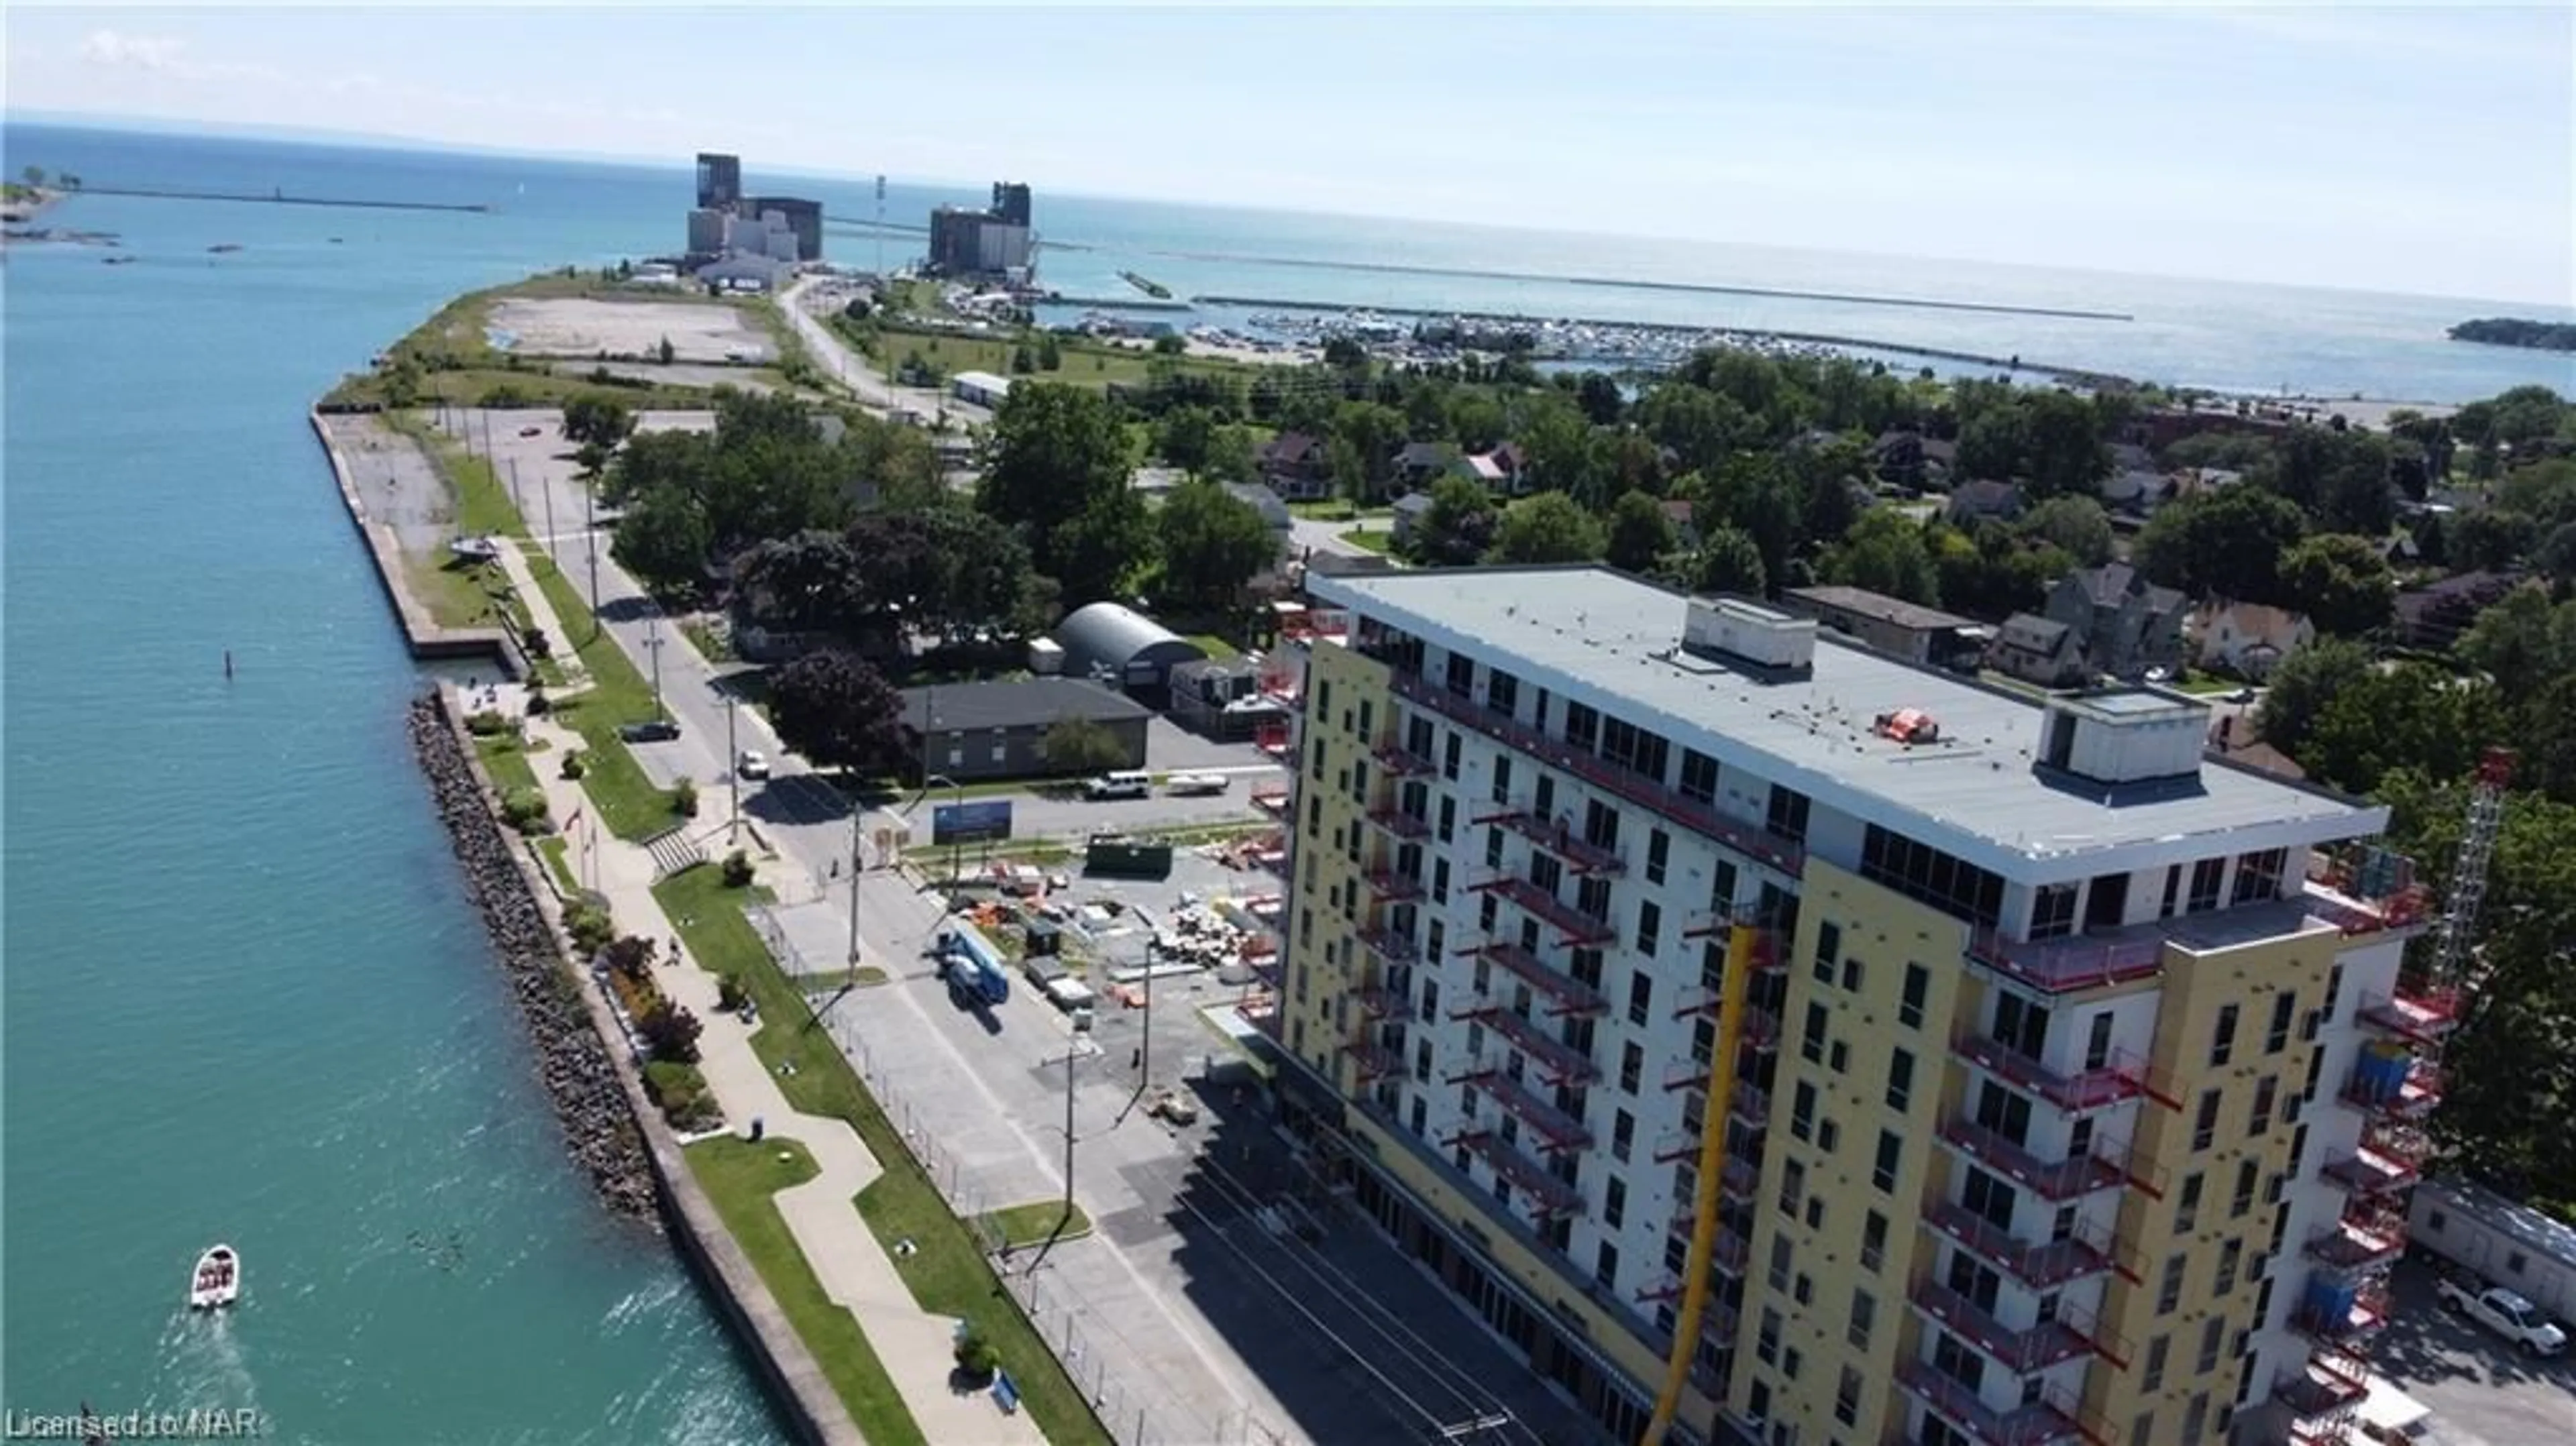 Lakeview for 118 West St #704, Port Colborne Ontario L3K 4E6